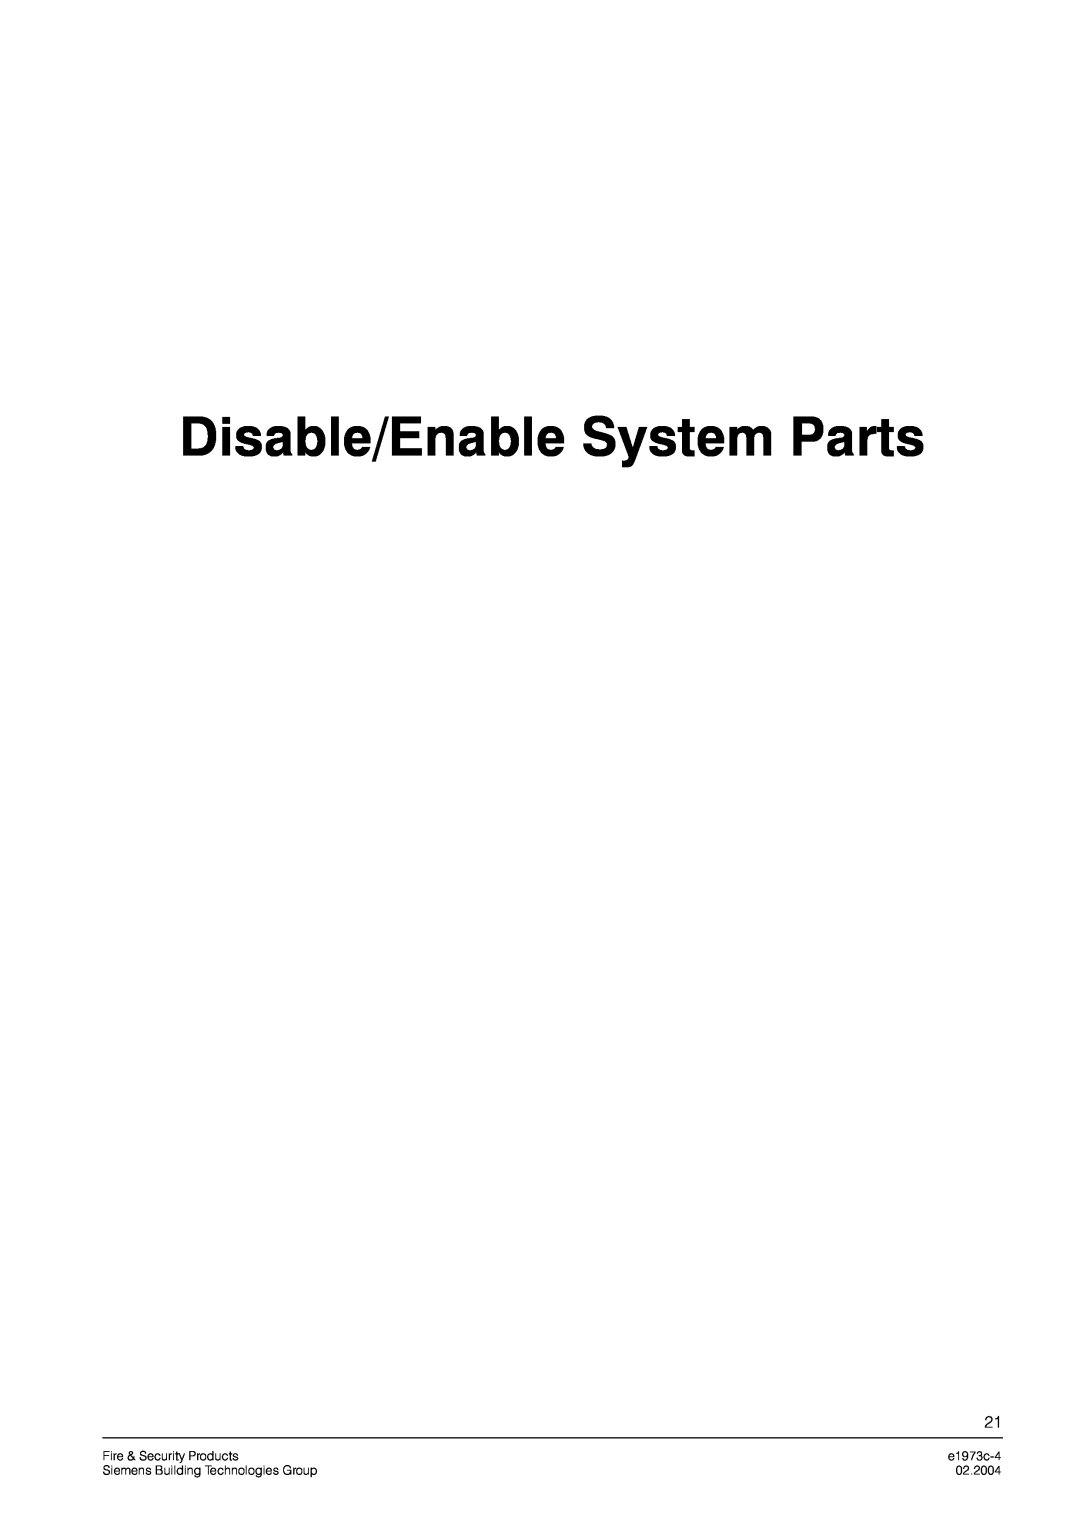 Siemens FC330A manual Disable/Enable System Parts, Fire & Security Products, e1973c-4, Siemens Building Technologies Group 